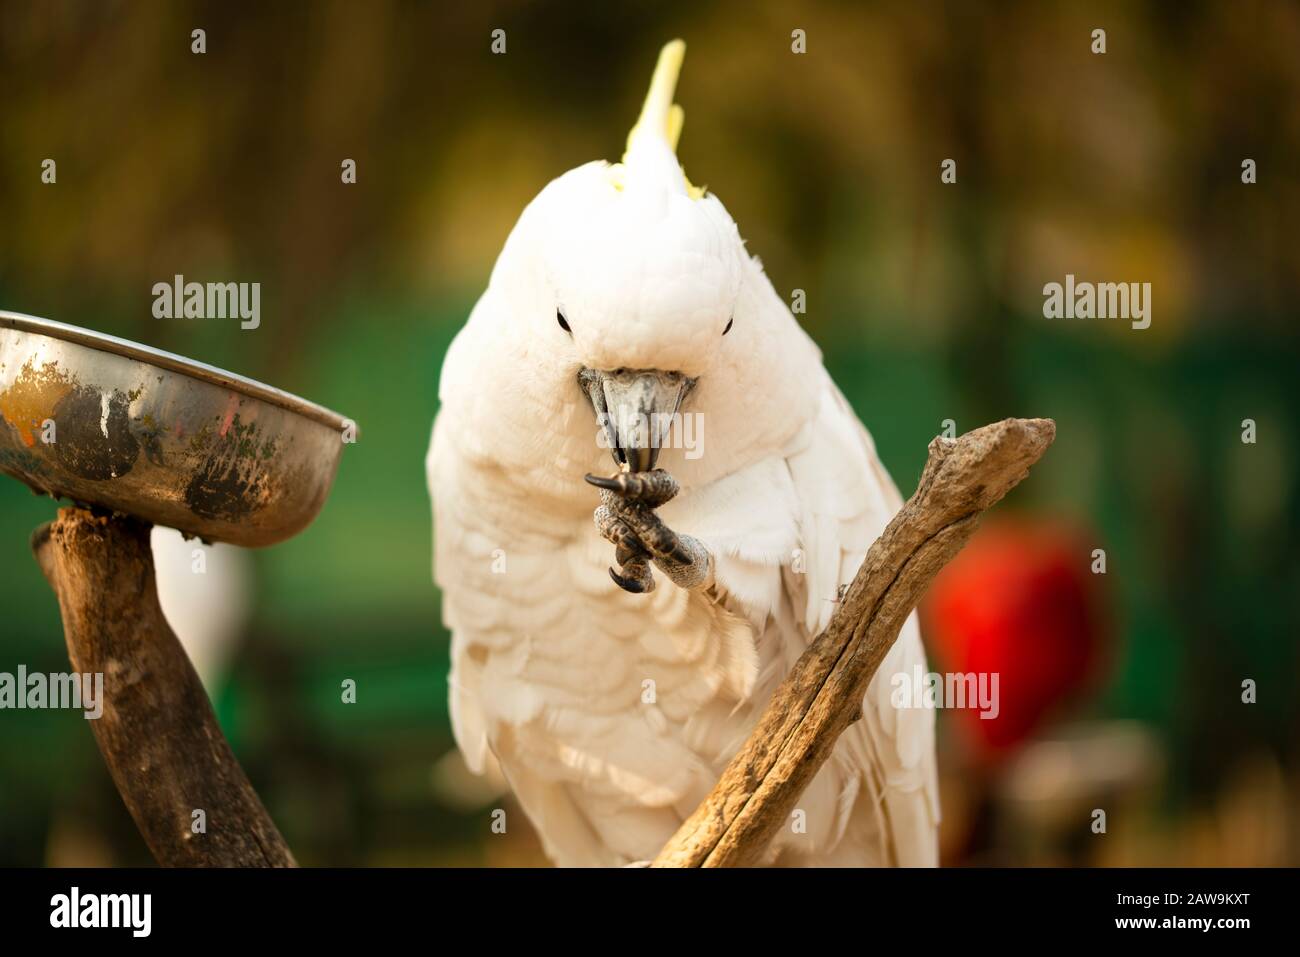 Yellow Crested Cockatoo parrot holding and eating a nut Stock Photo